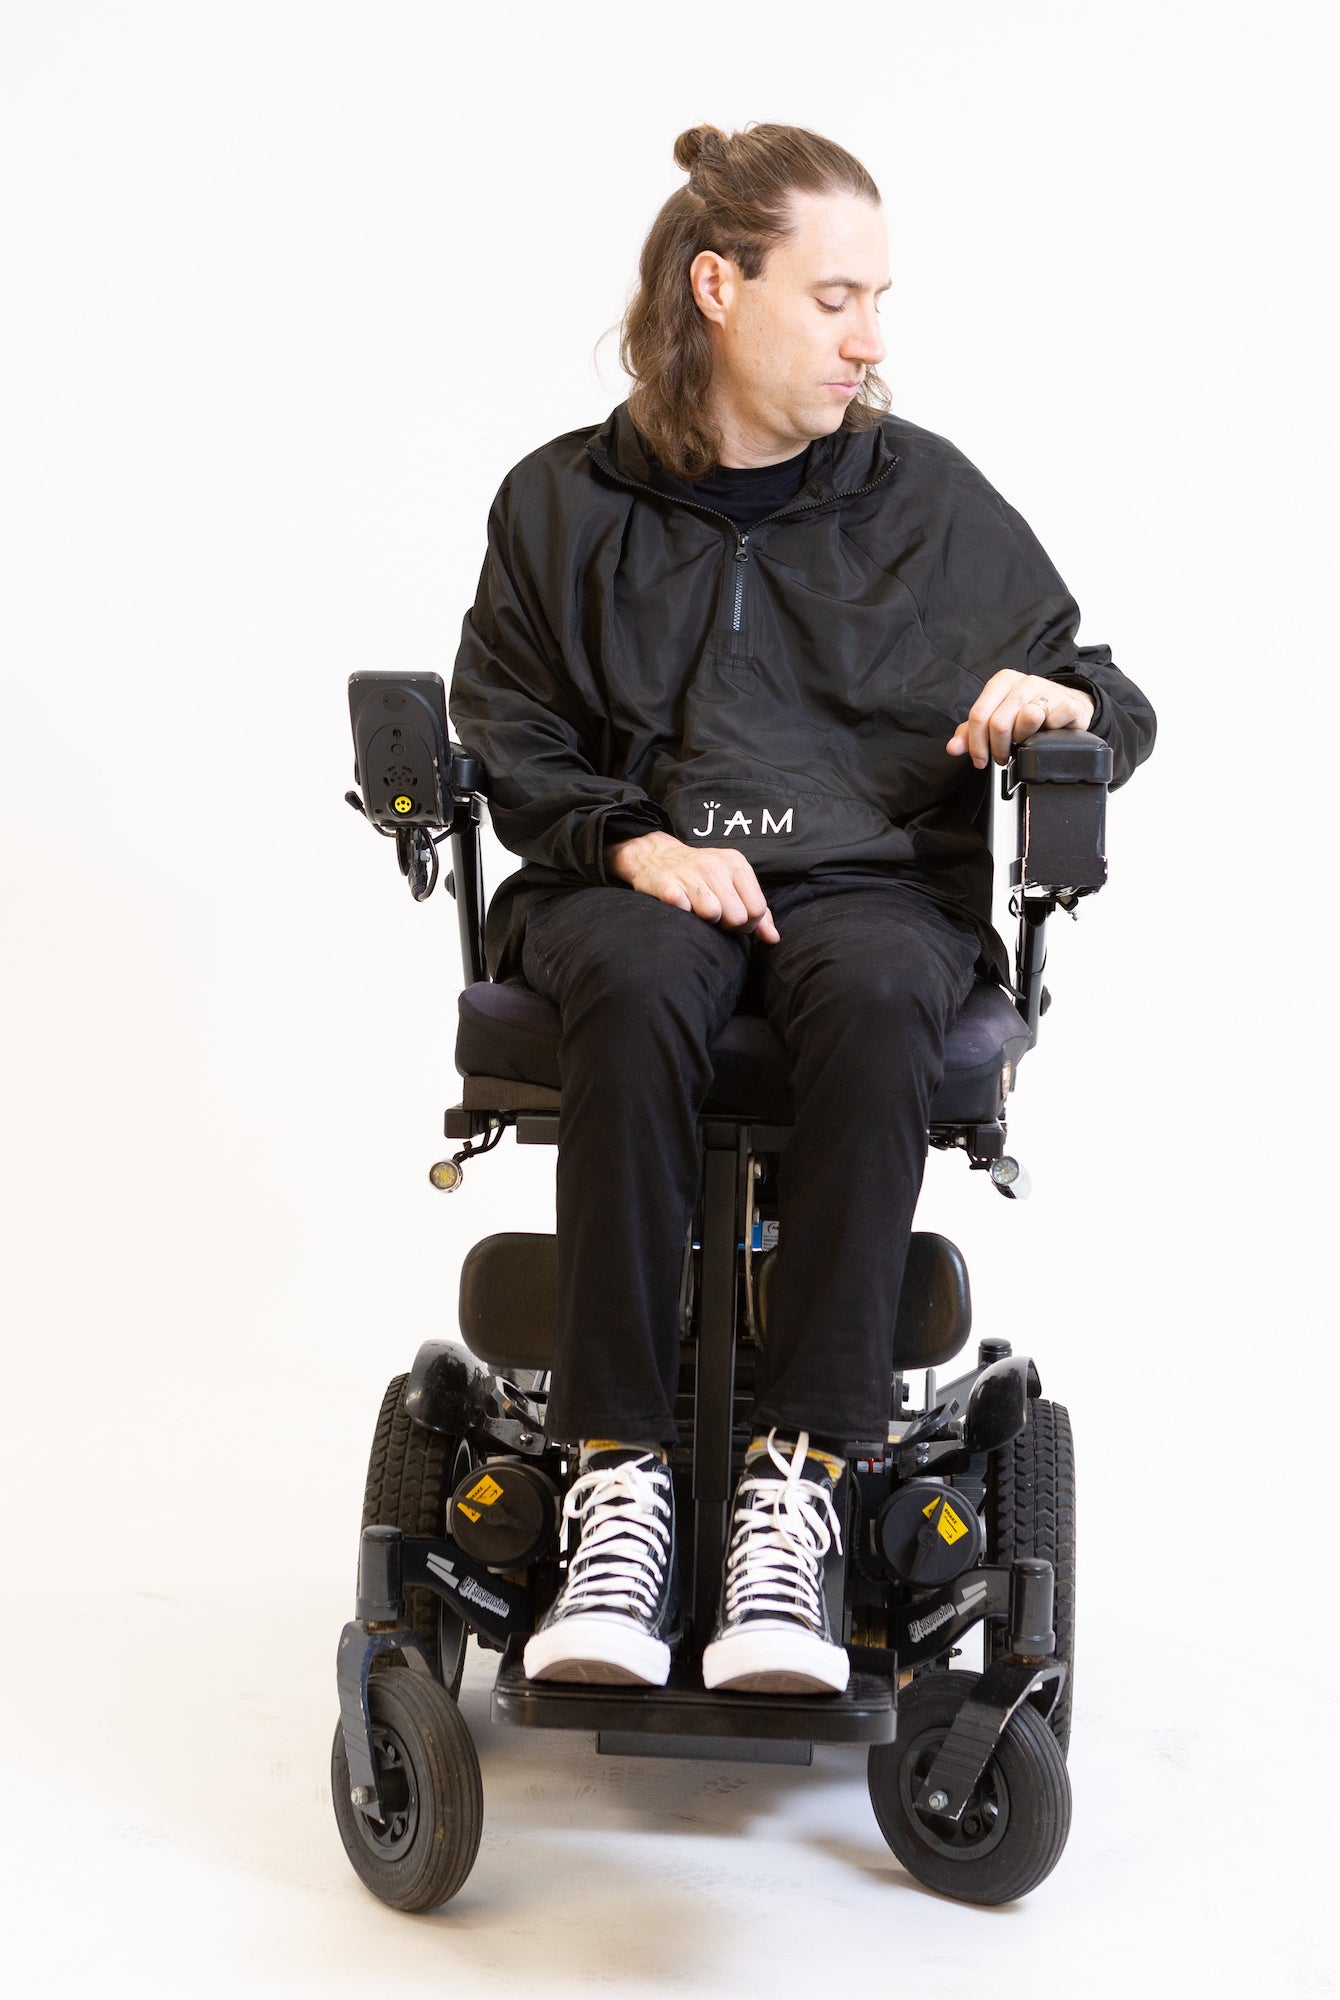 A model seated in his wheelchair in front of a white background. He is wearing a black jacket with black chinos and sneakers. #Seated